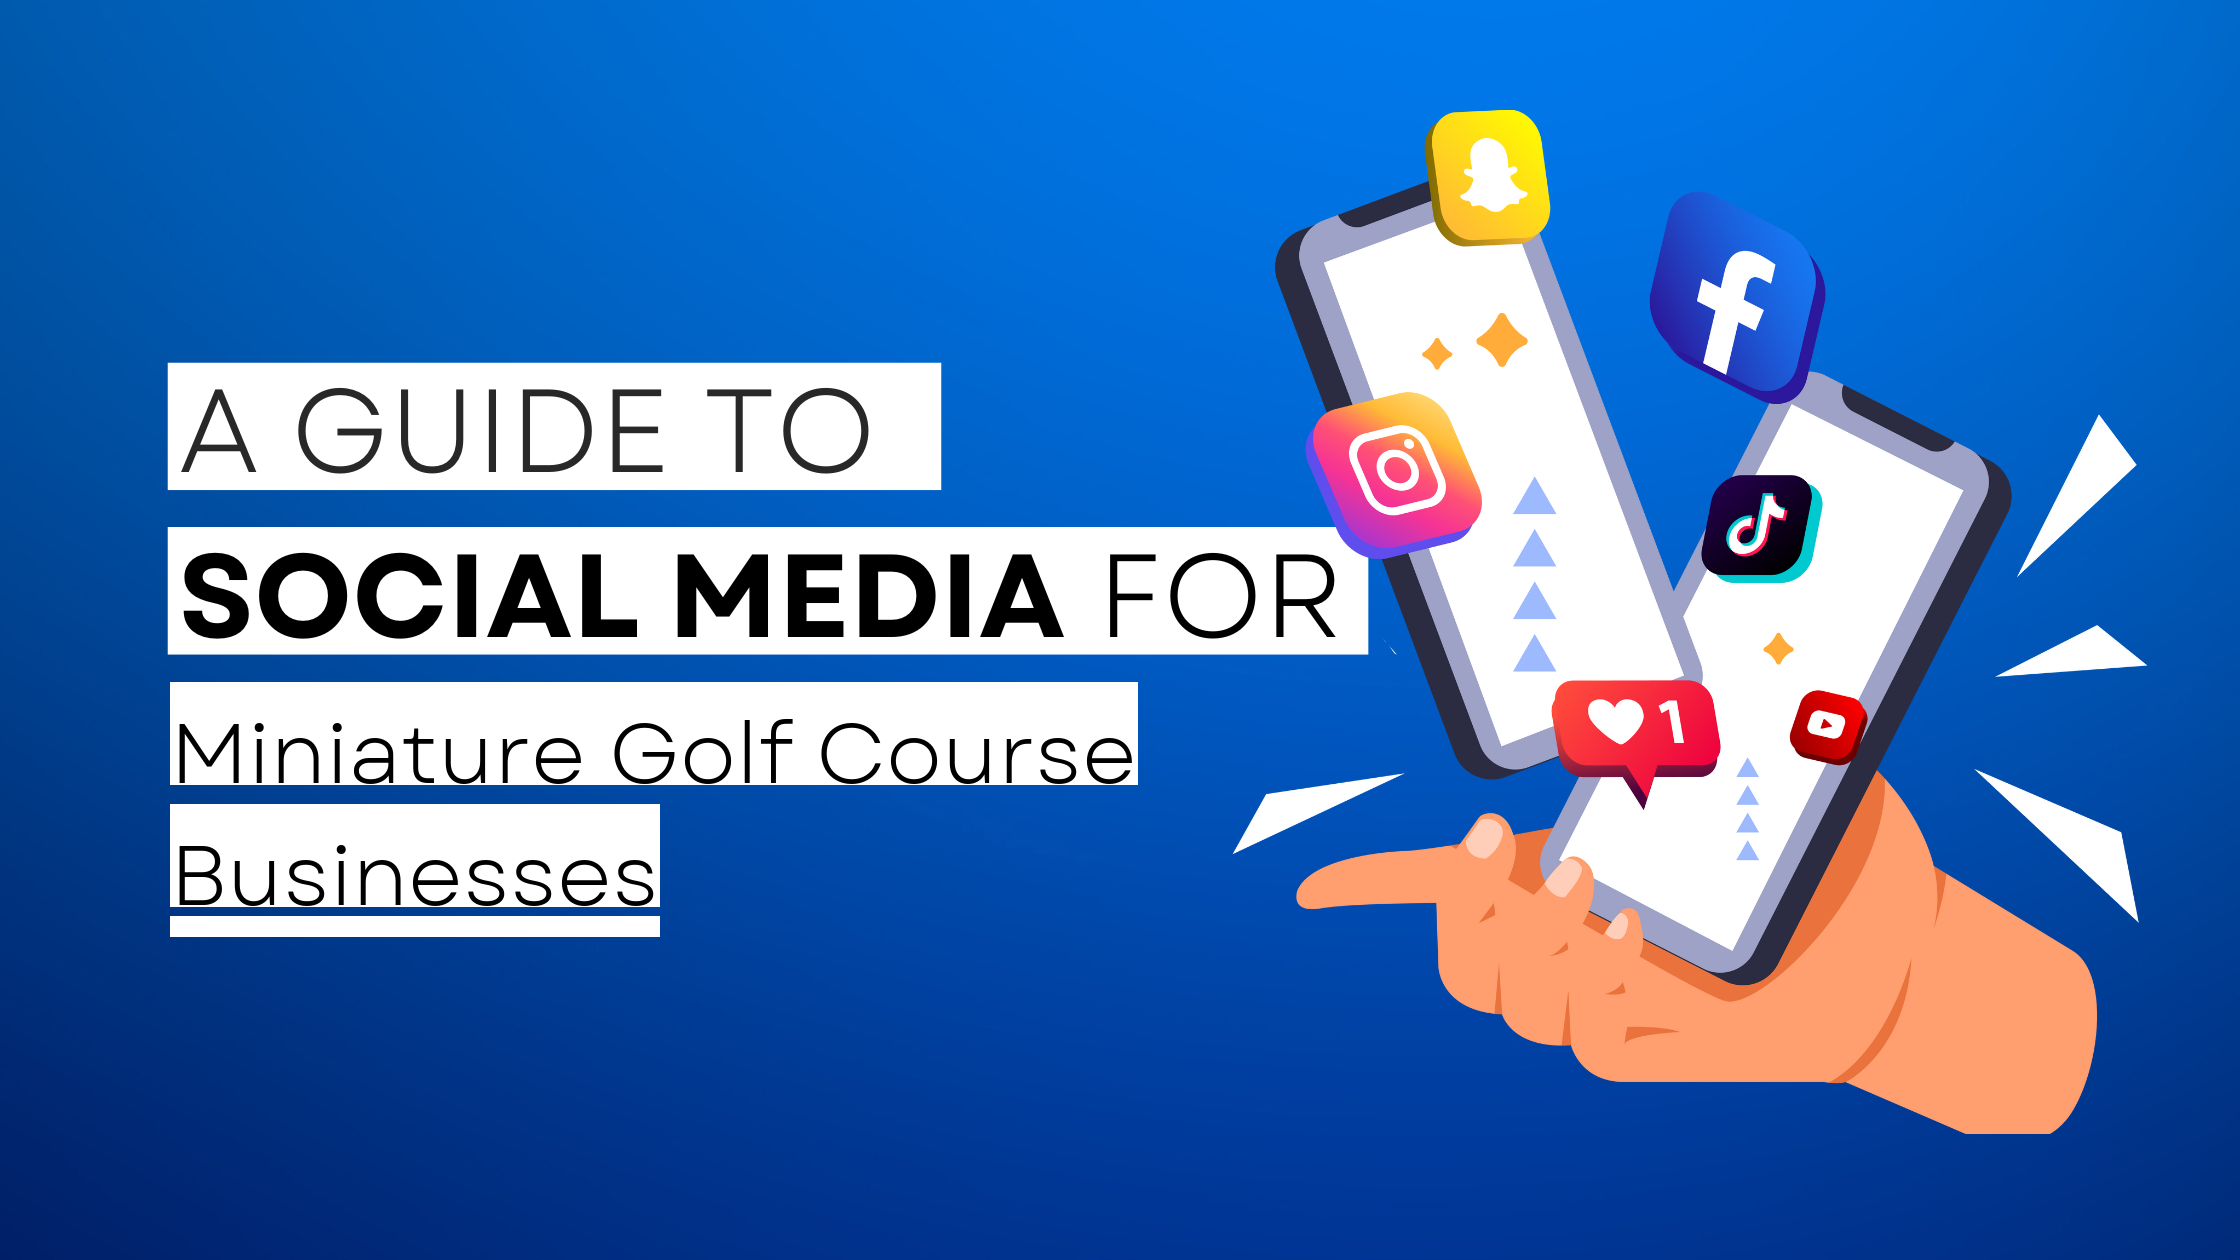 How to start Miniature Golf Course  on social media